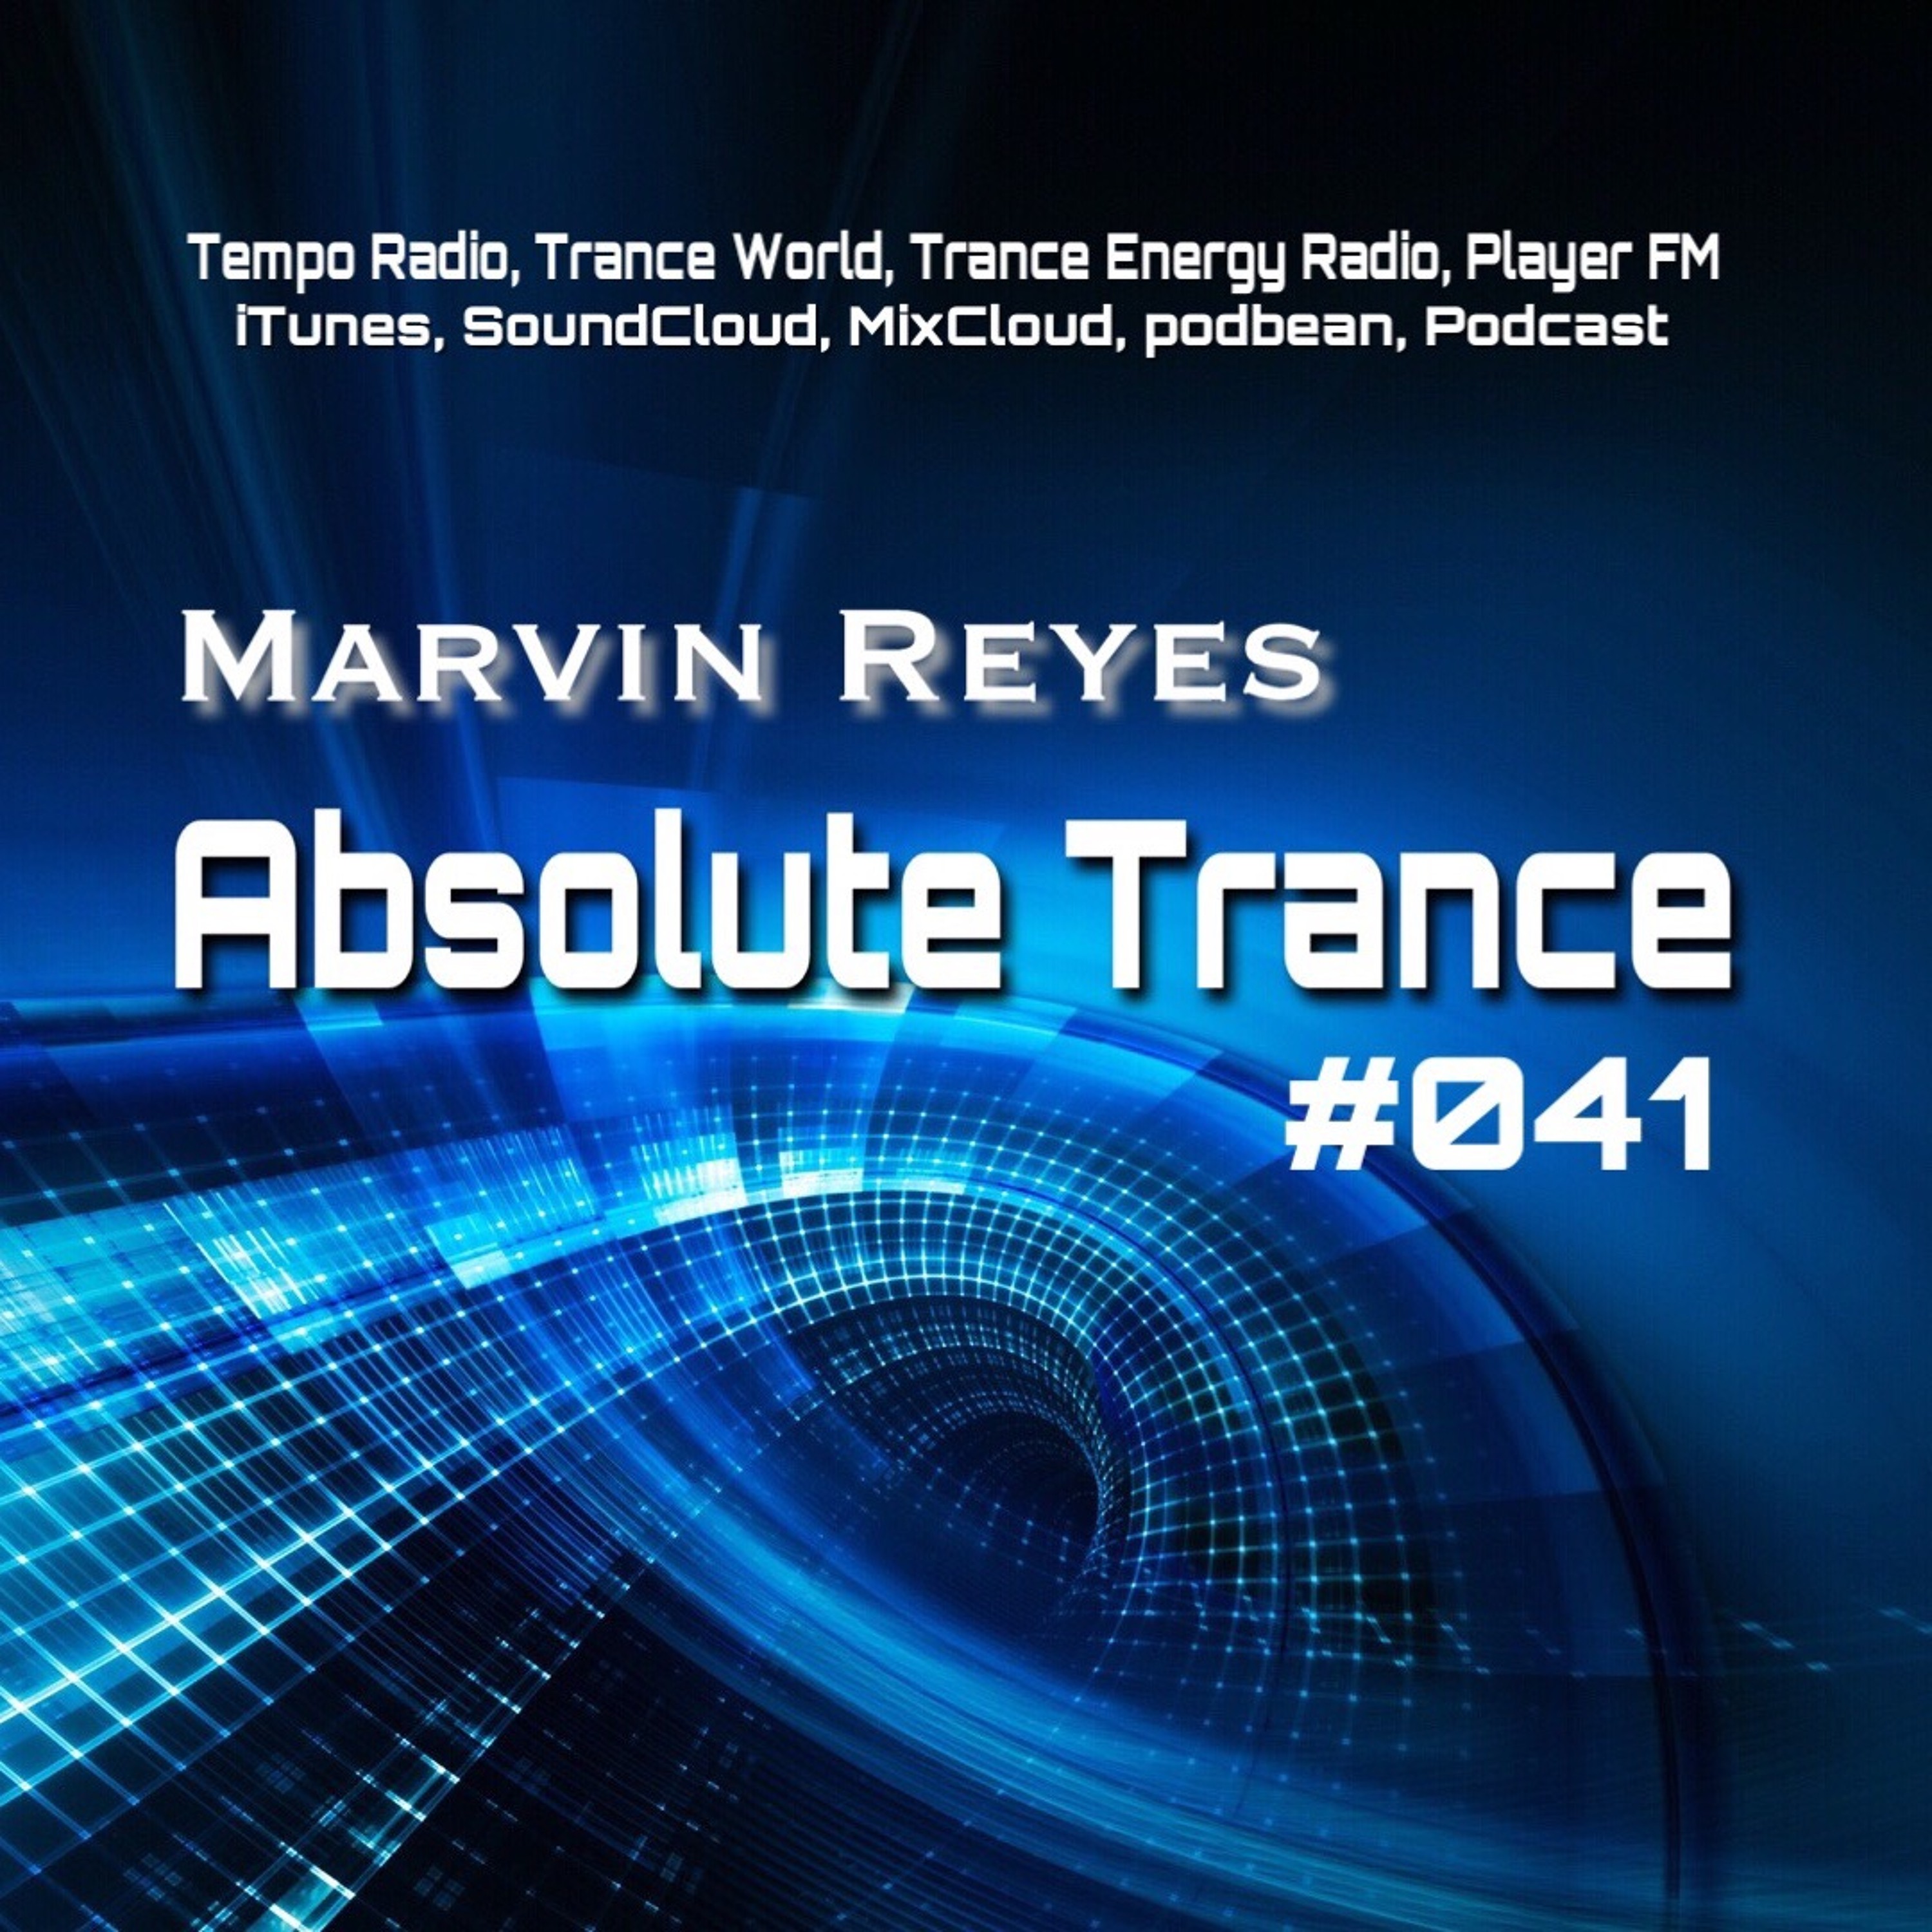 Absolute Trance #041